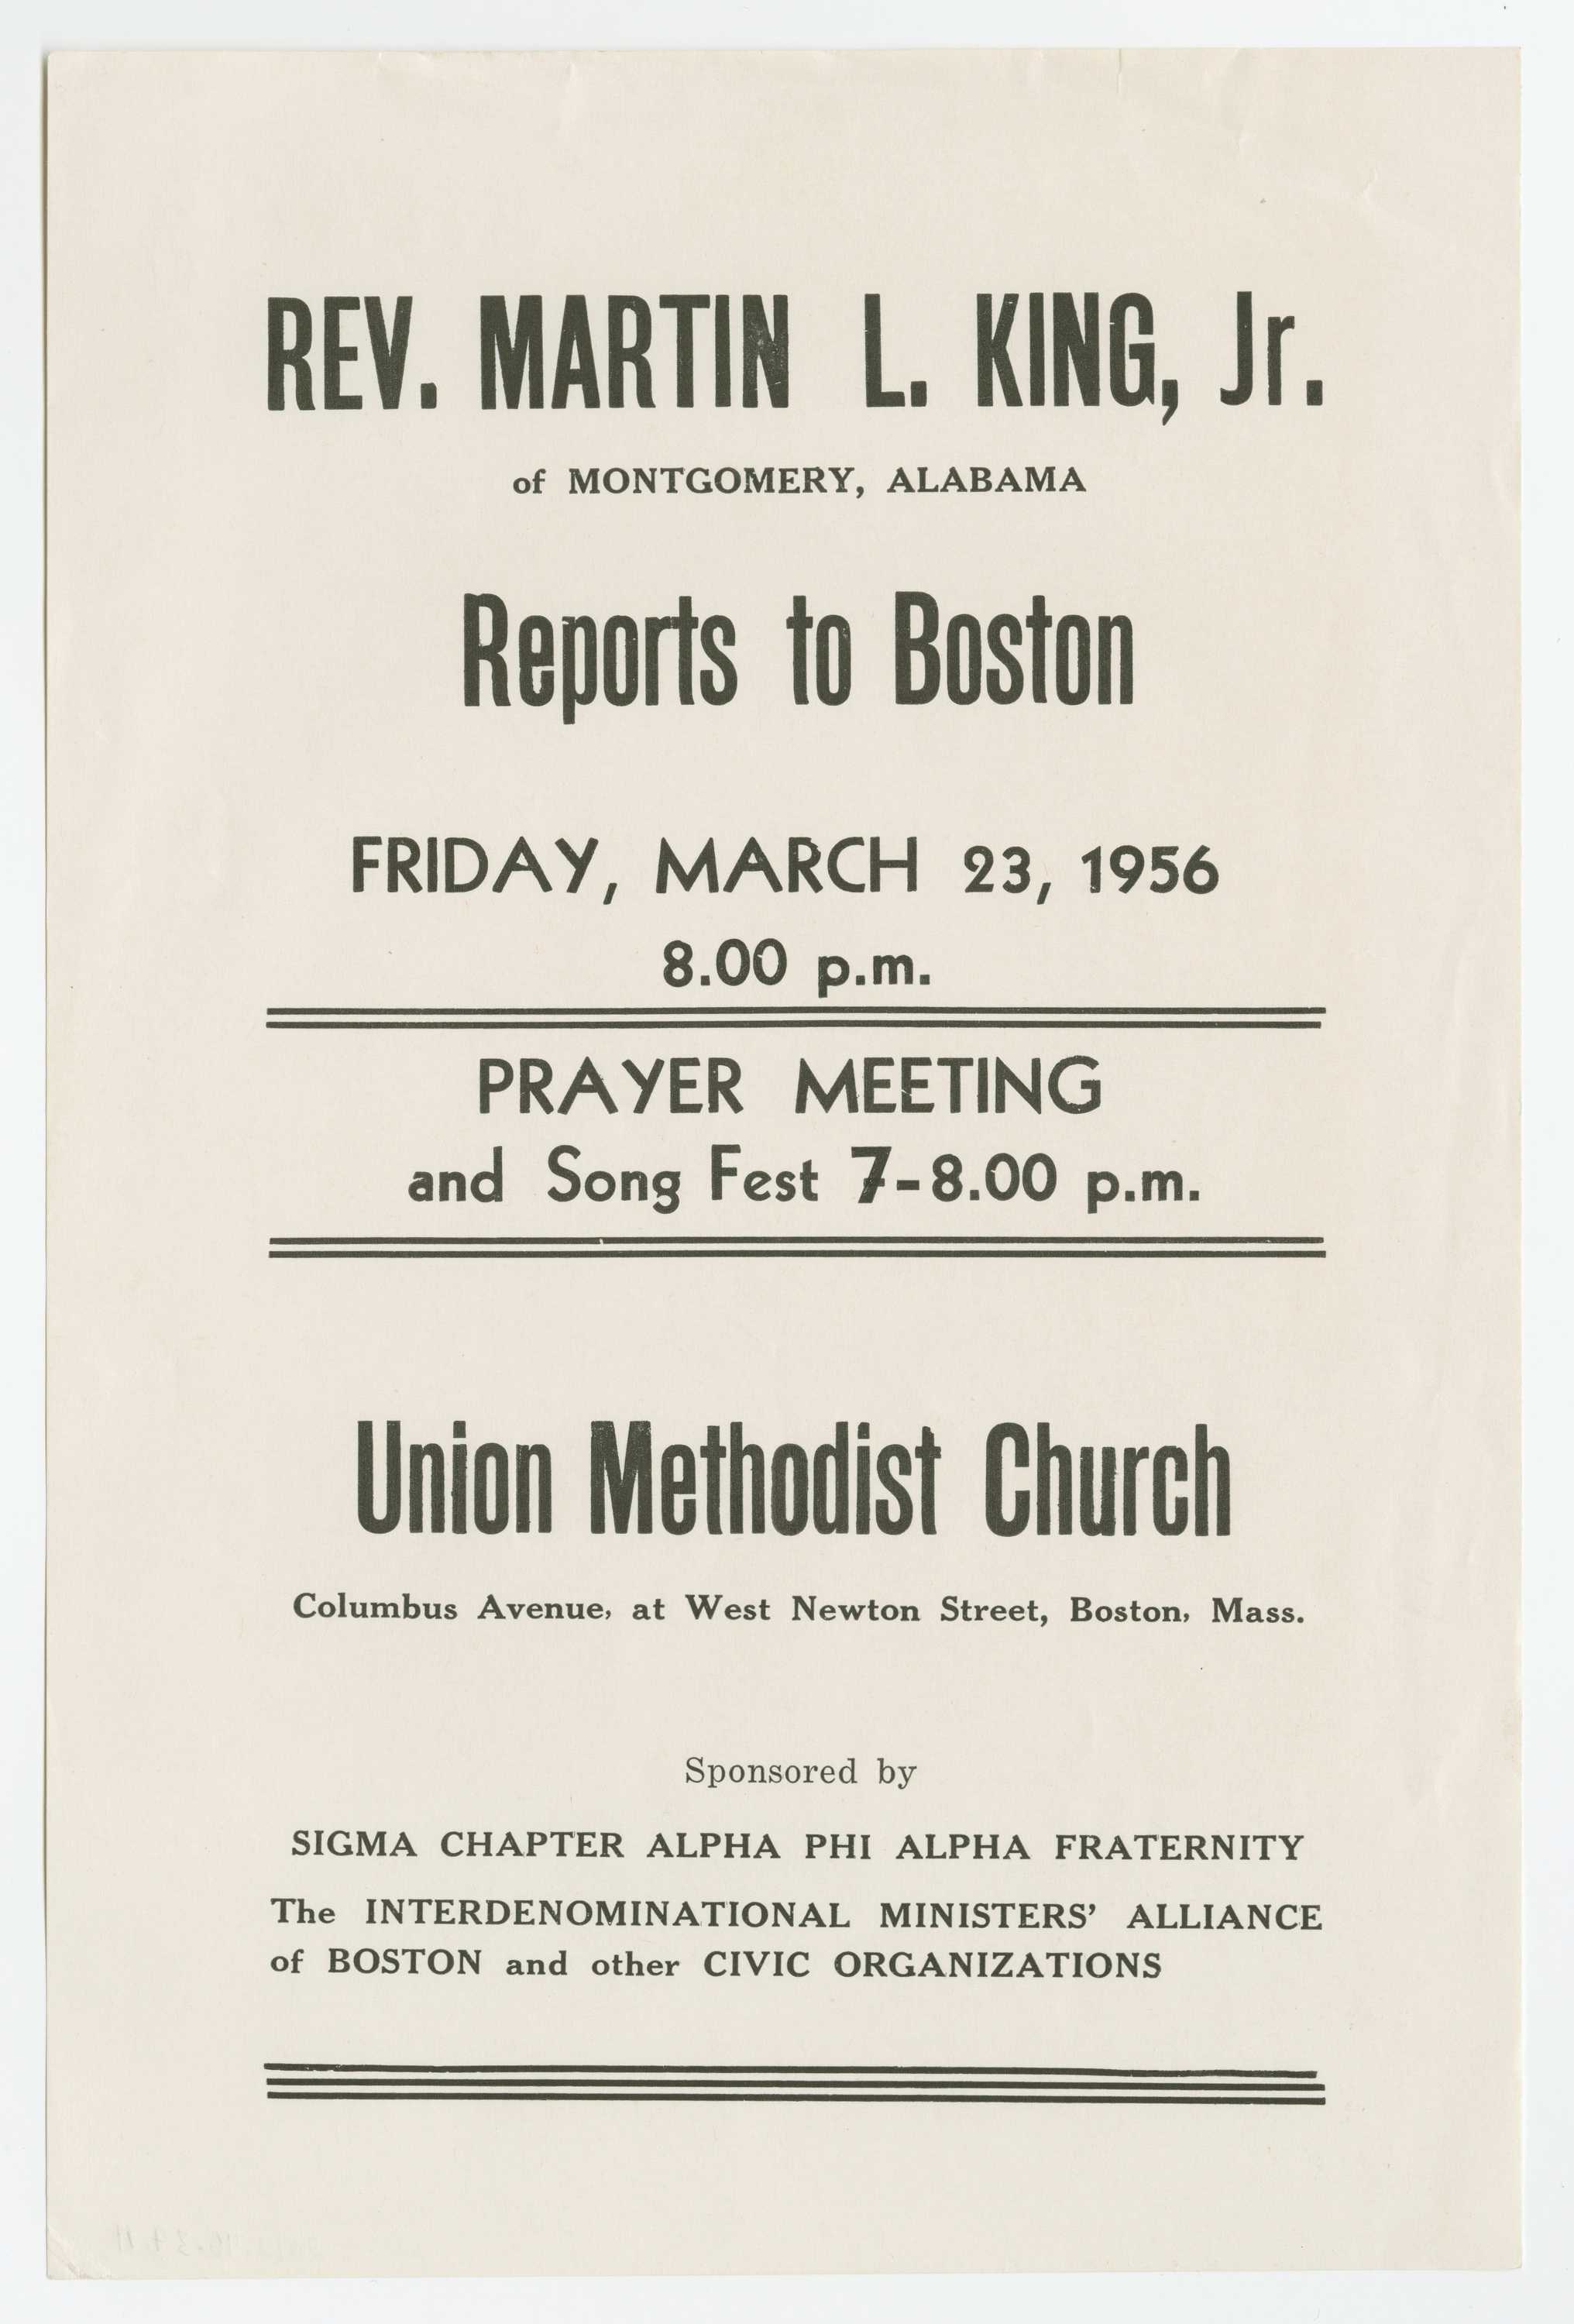 Image of handbill advertising a Prayer Meeting with Martin Luther King, Jr. The handbill has black printed text on white paper.